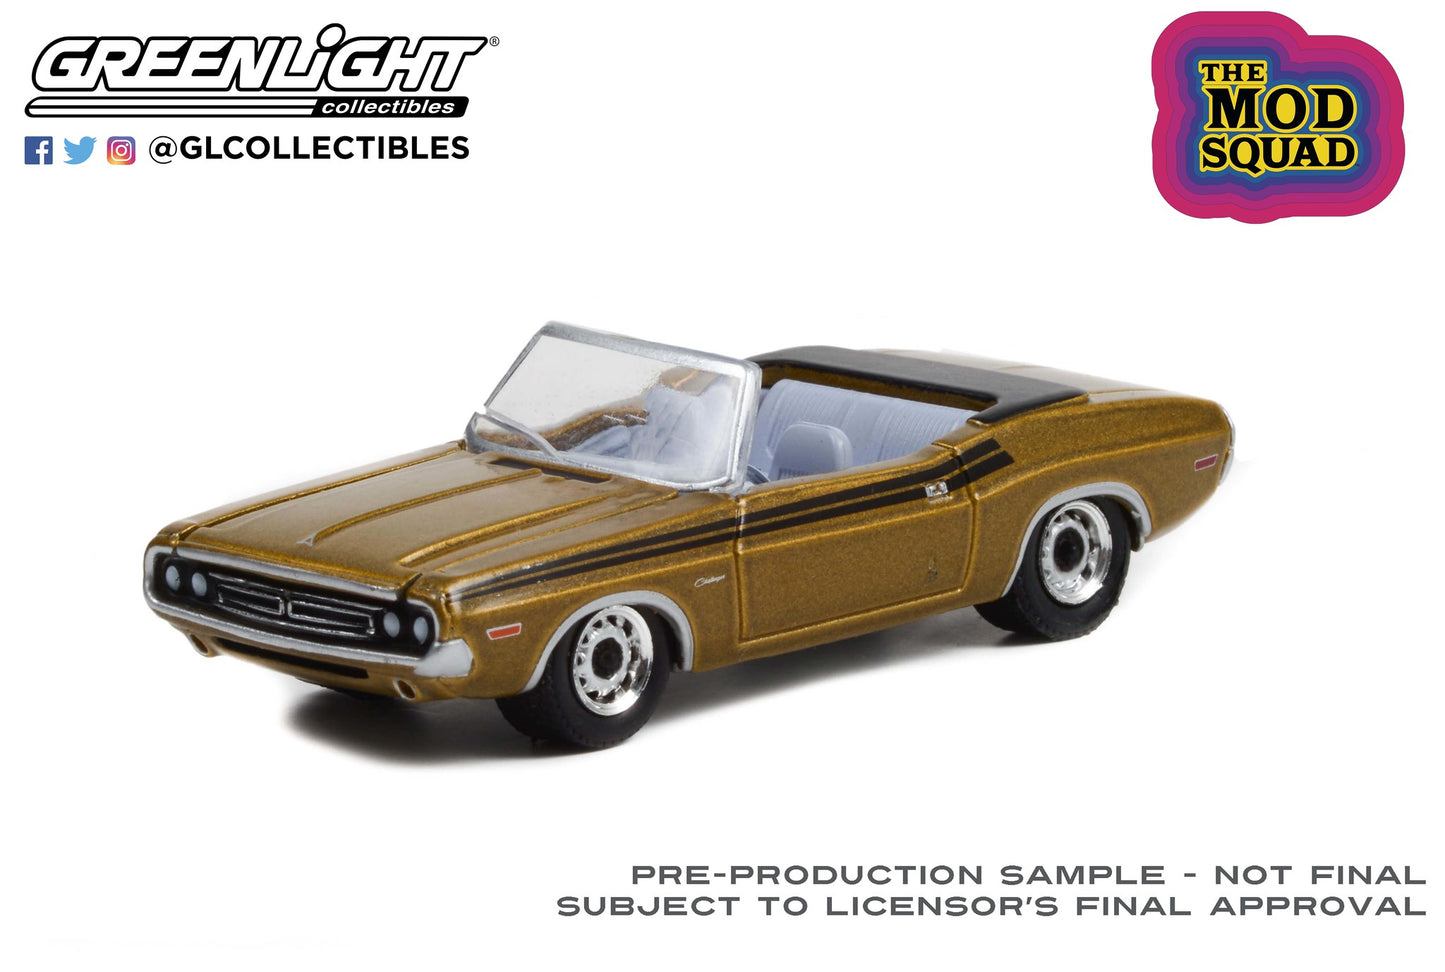 GreenLight 1:64 Hollywood Series 34 - The Mod Squad (1968-73 TV Series) - 1971 Dodge Challenger 340 Convertible - Gold 44940-A